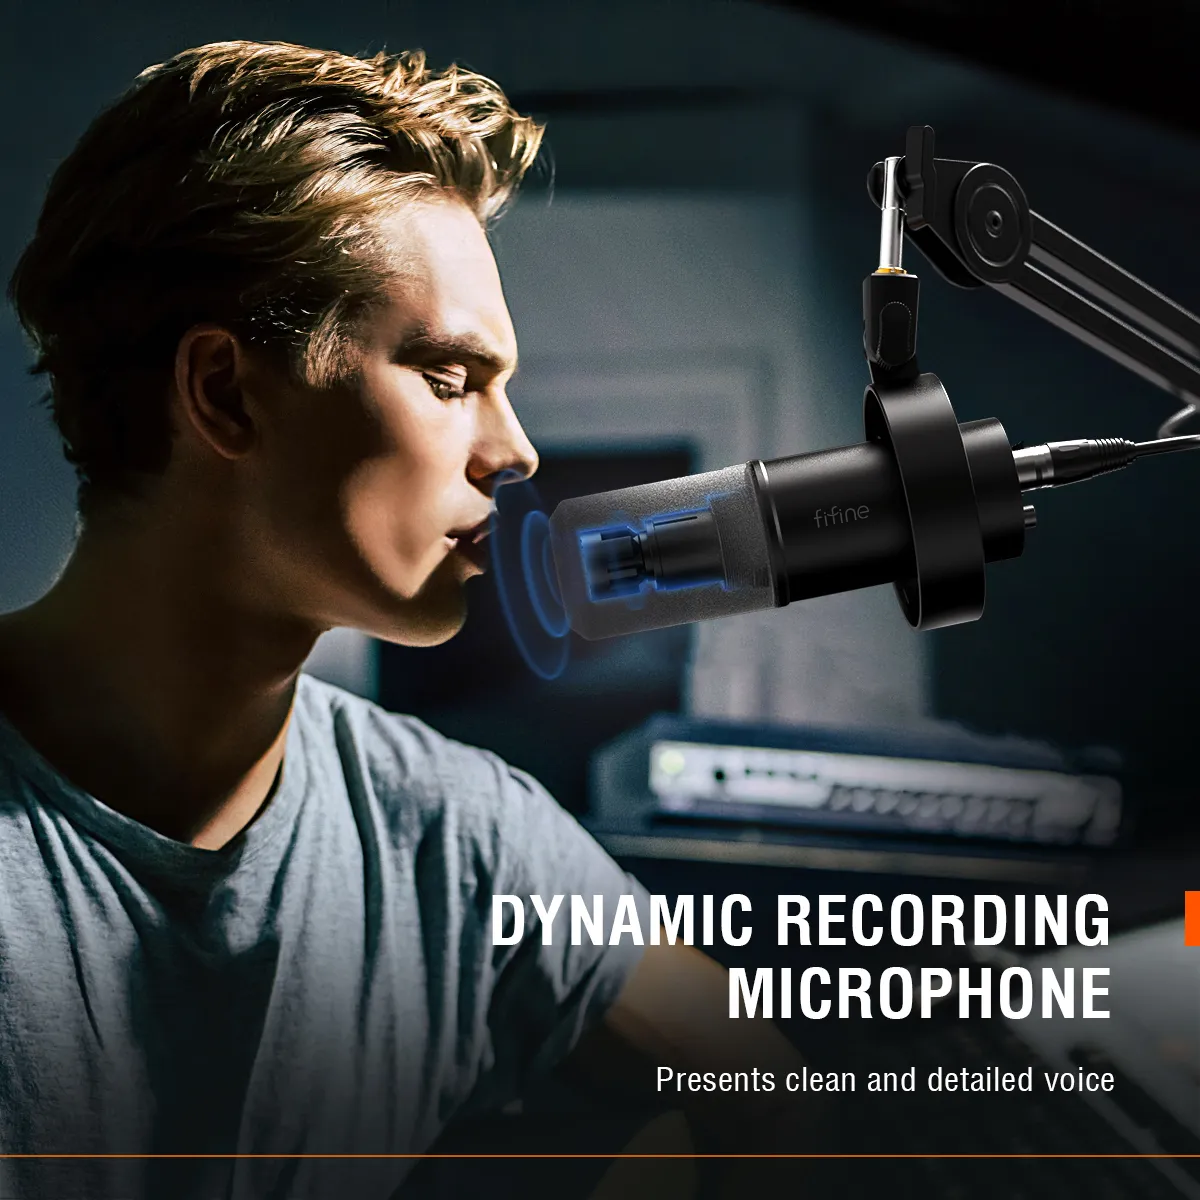 FIFINE XLR/USB Dynamic Microphone for Podcast Recording, PC